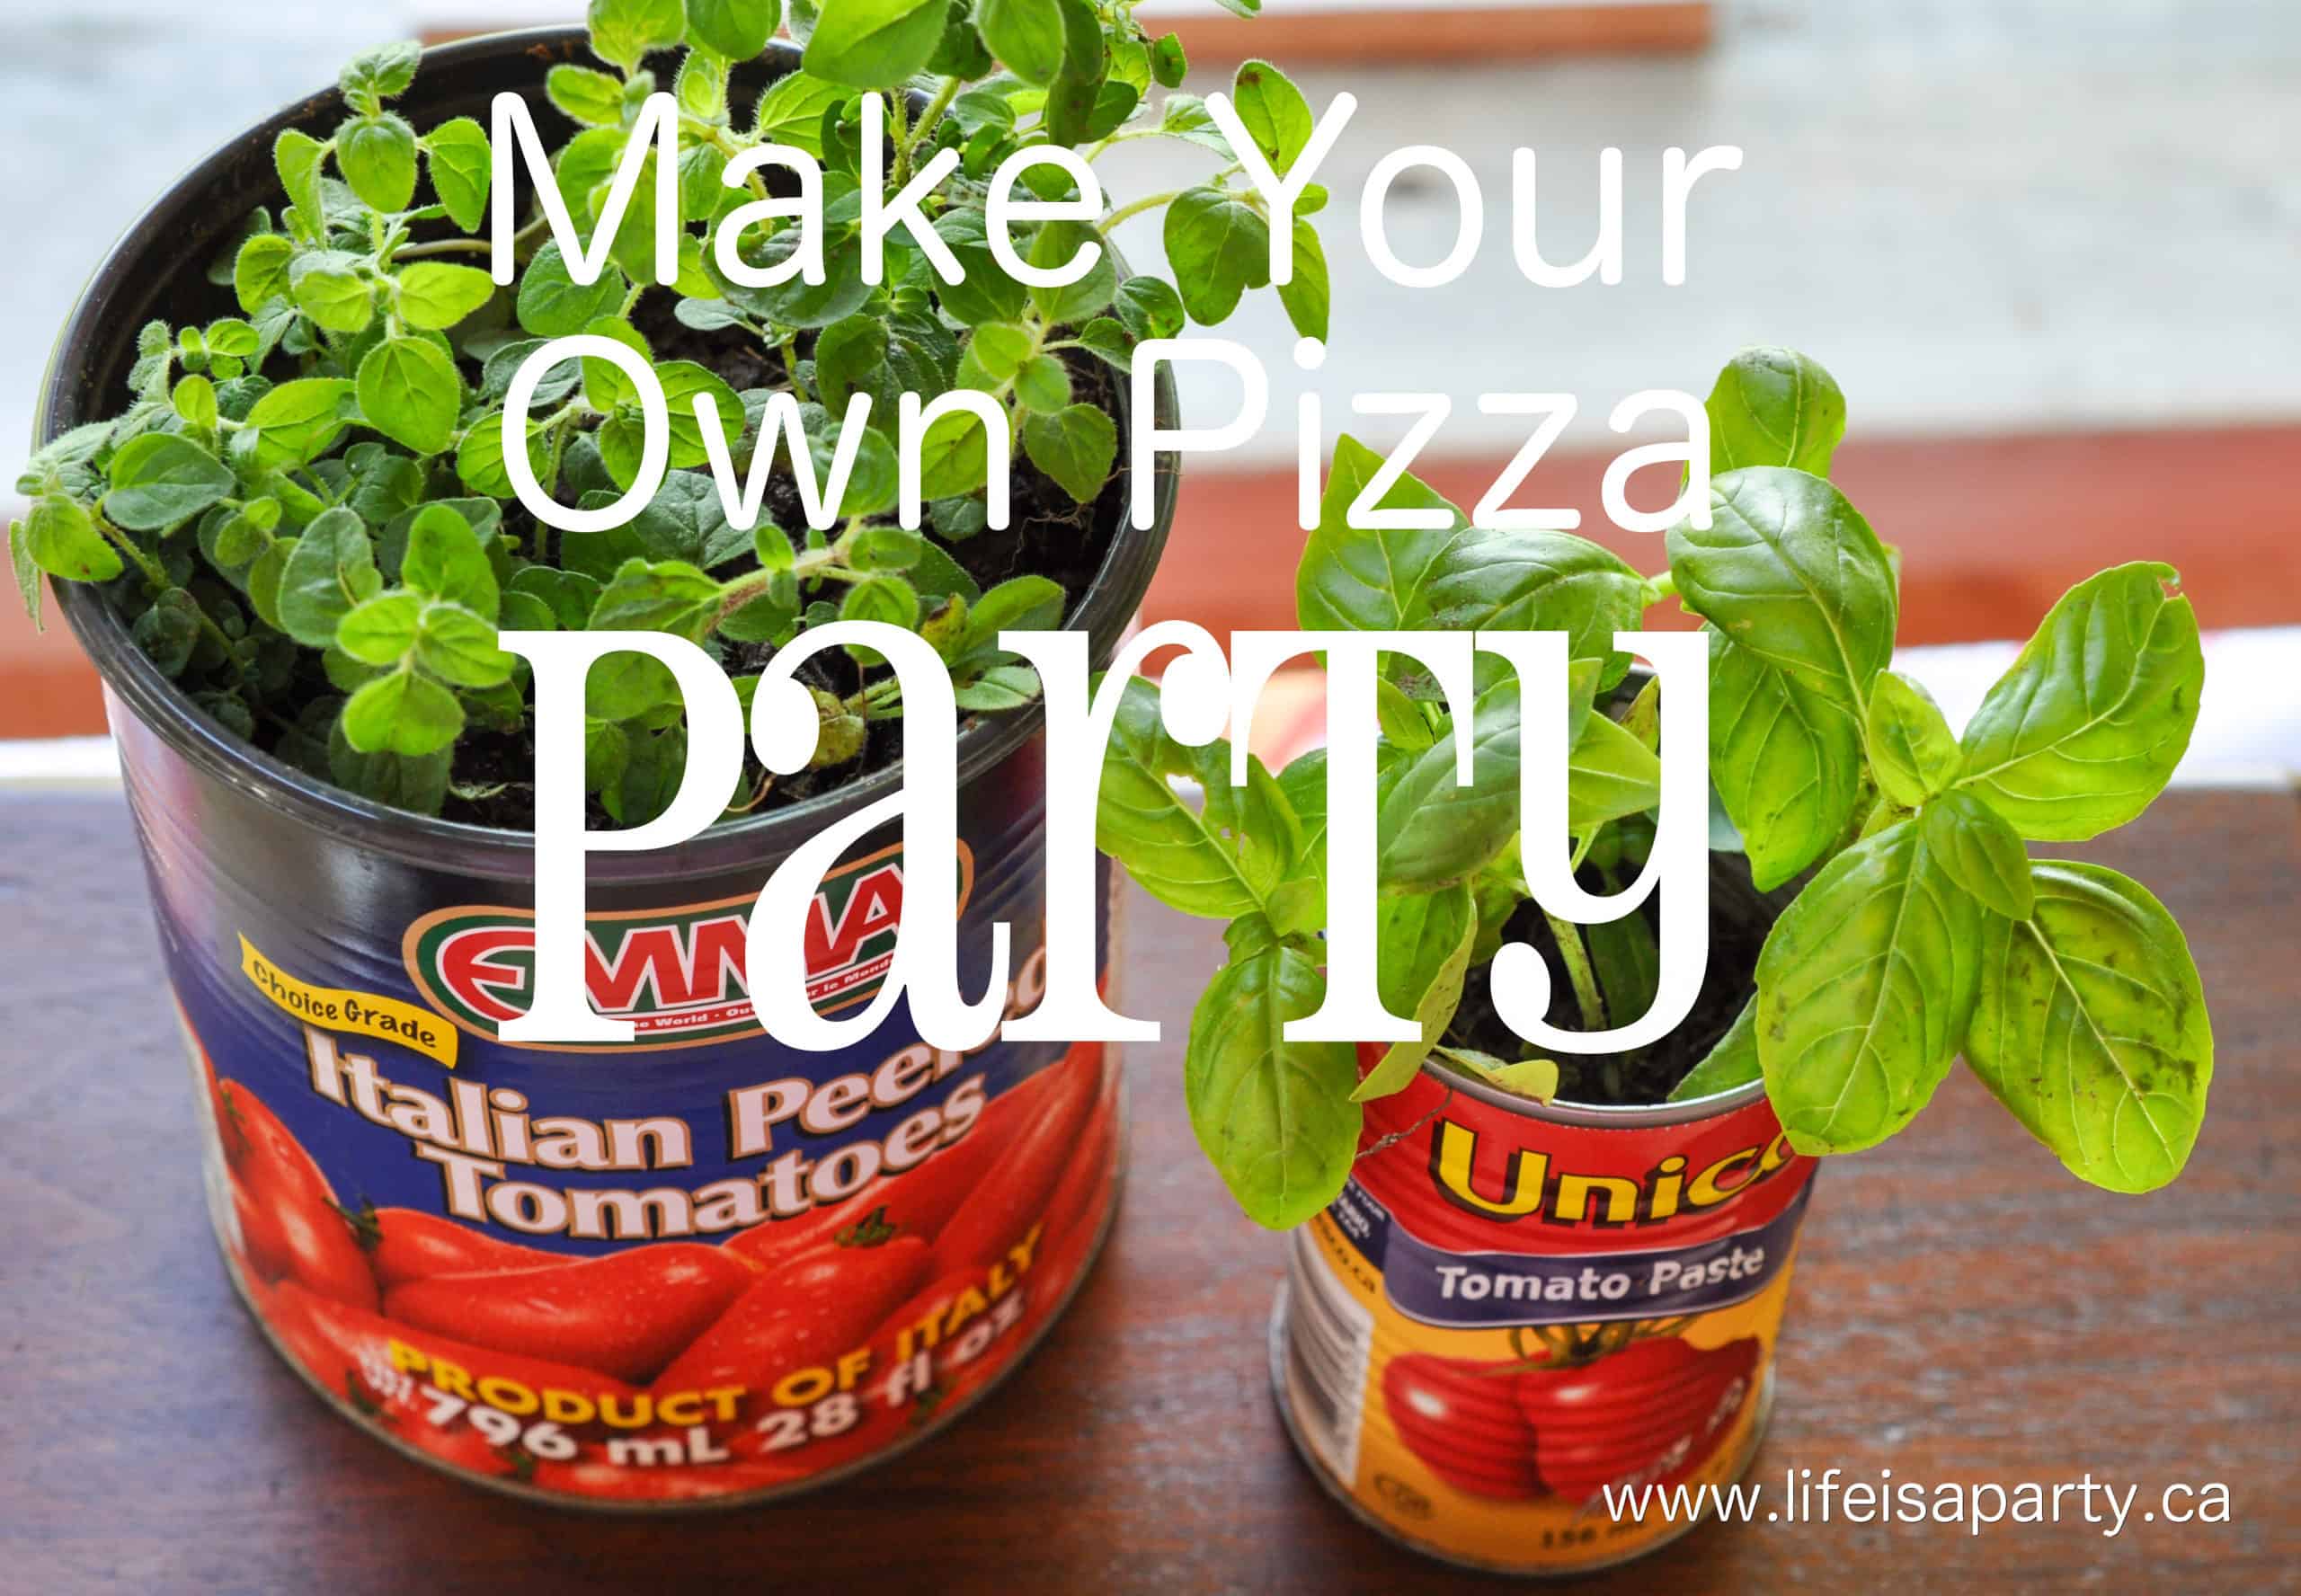 Make Your Own Pizza Party!